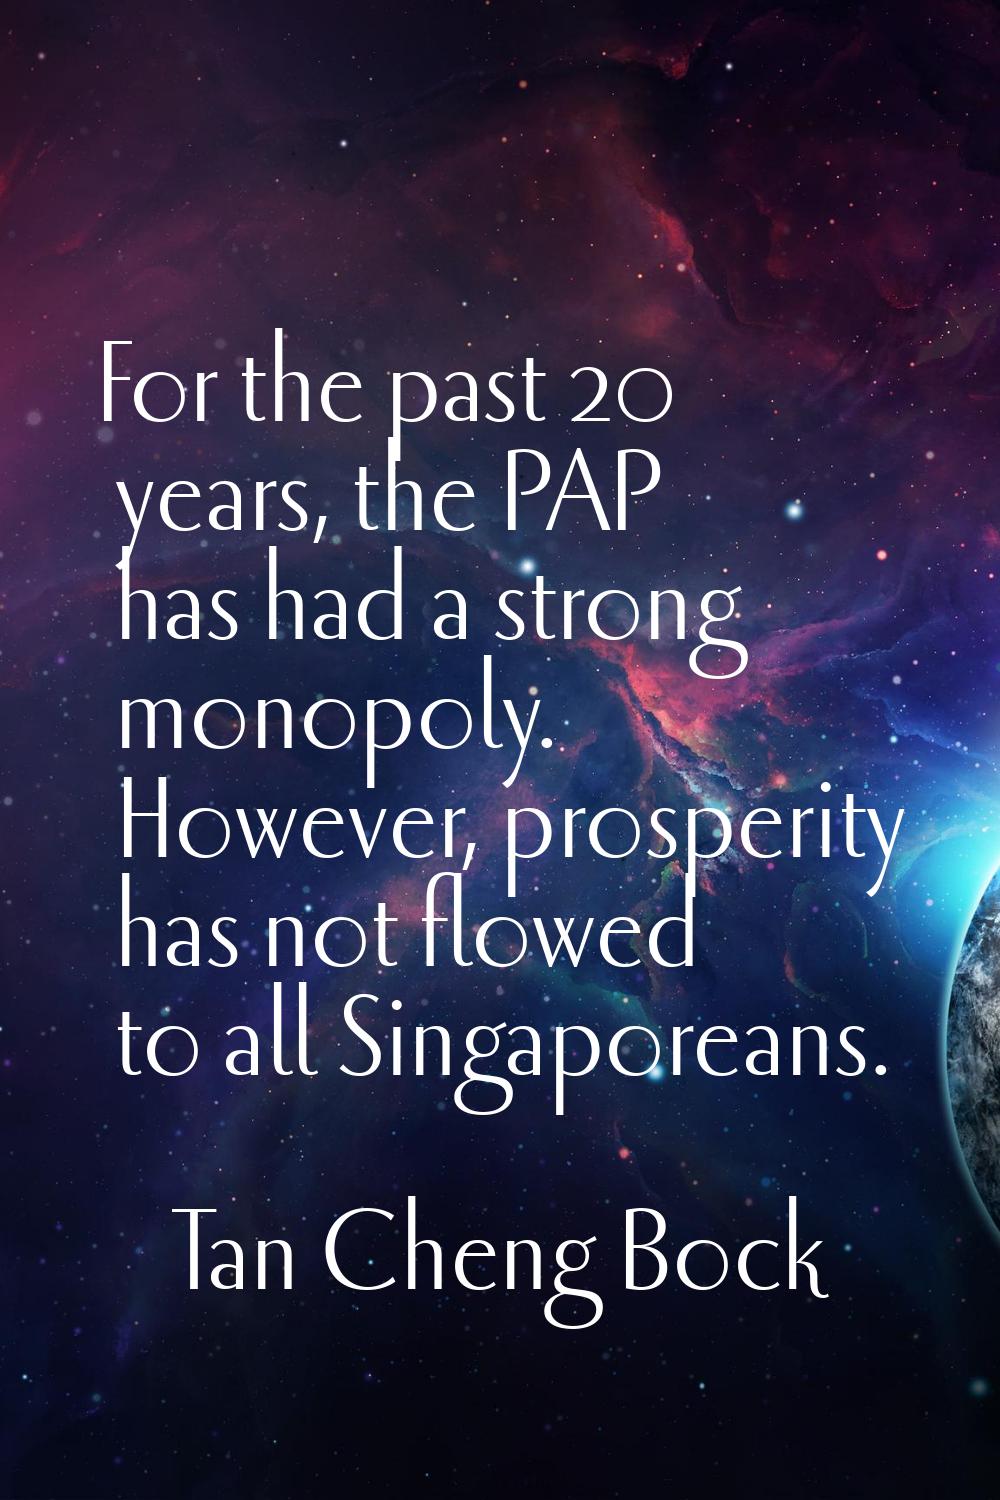 For the past 20 years, the PAP has had a strong monopoly. However, prosperity has not flowed to all